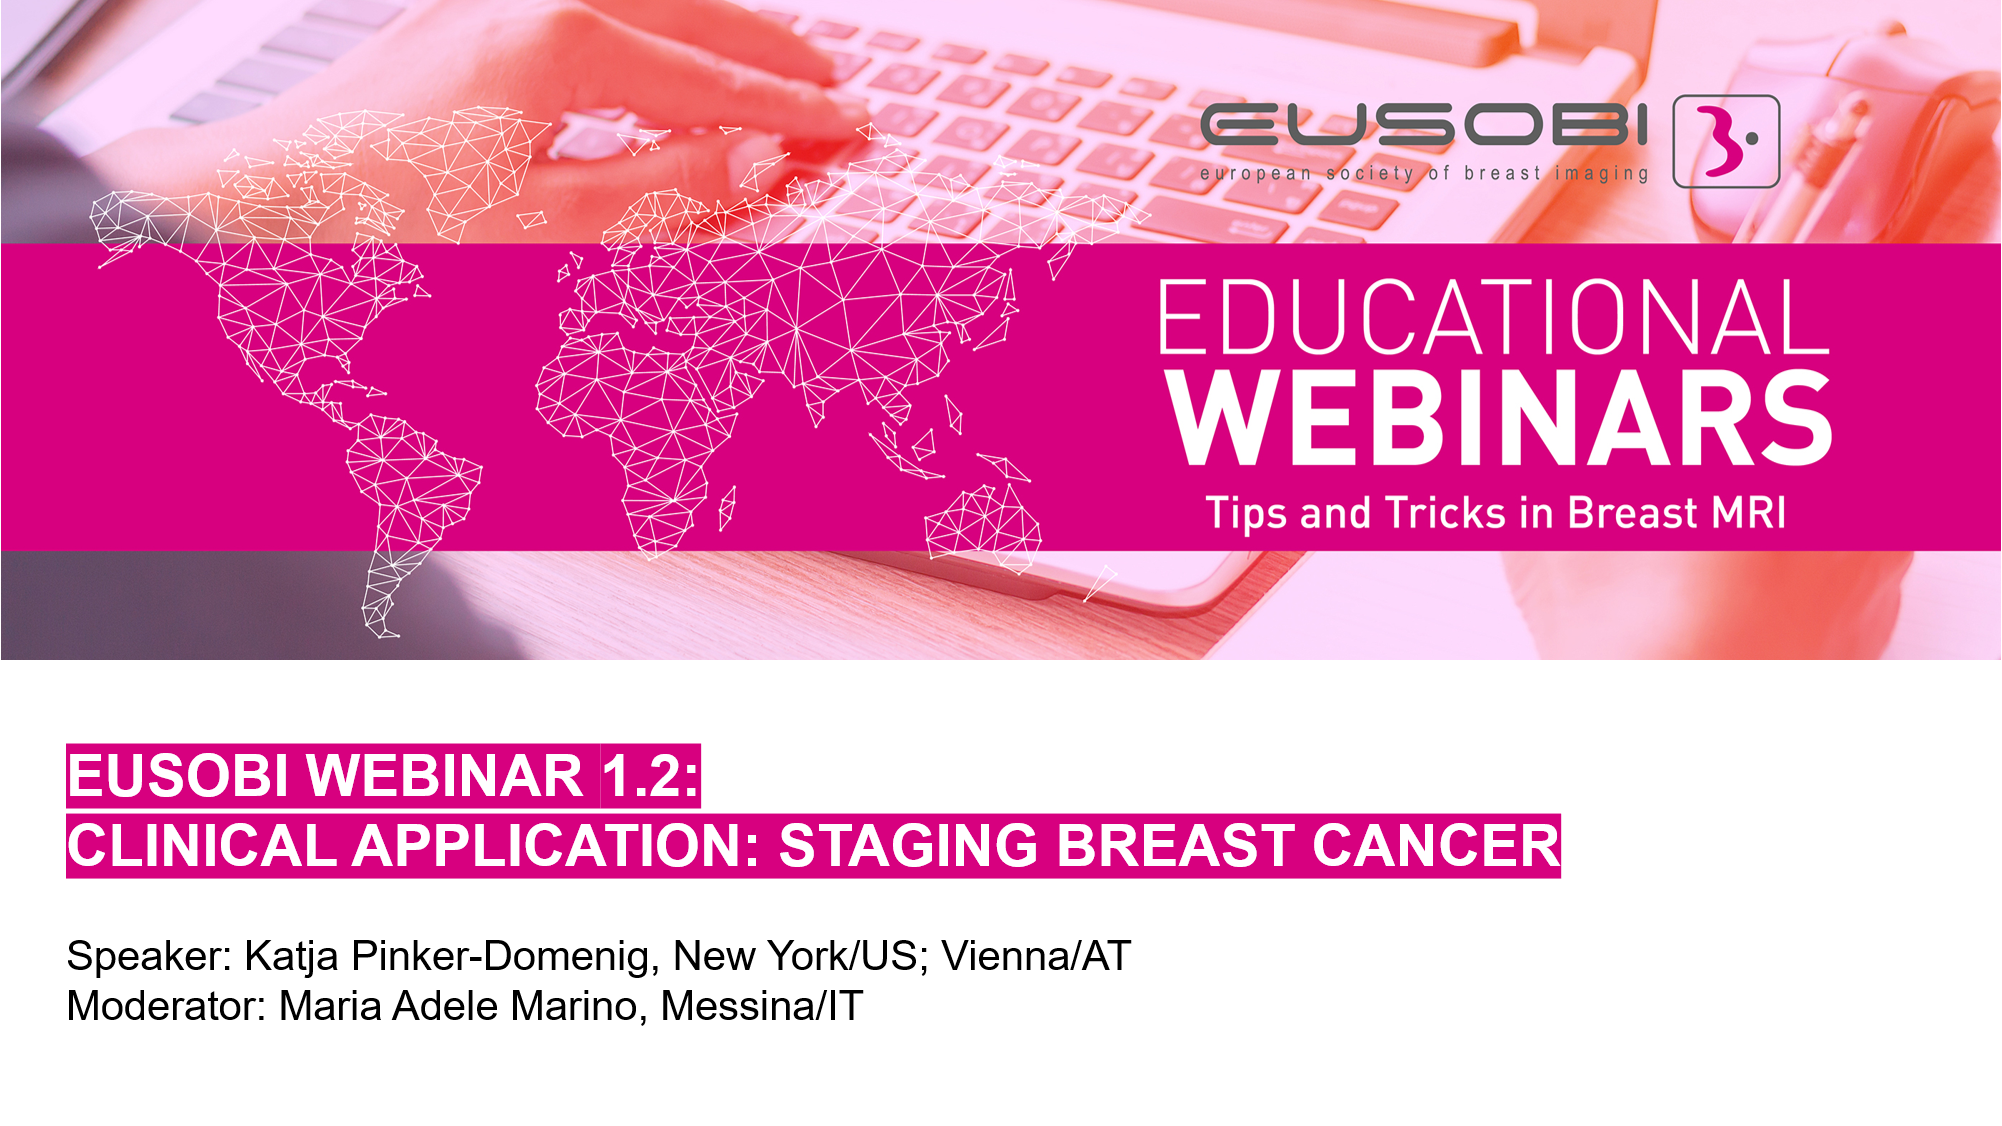 1.2 / Clinical application: Staging breast cancer